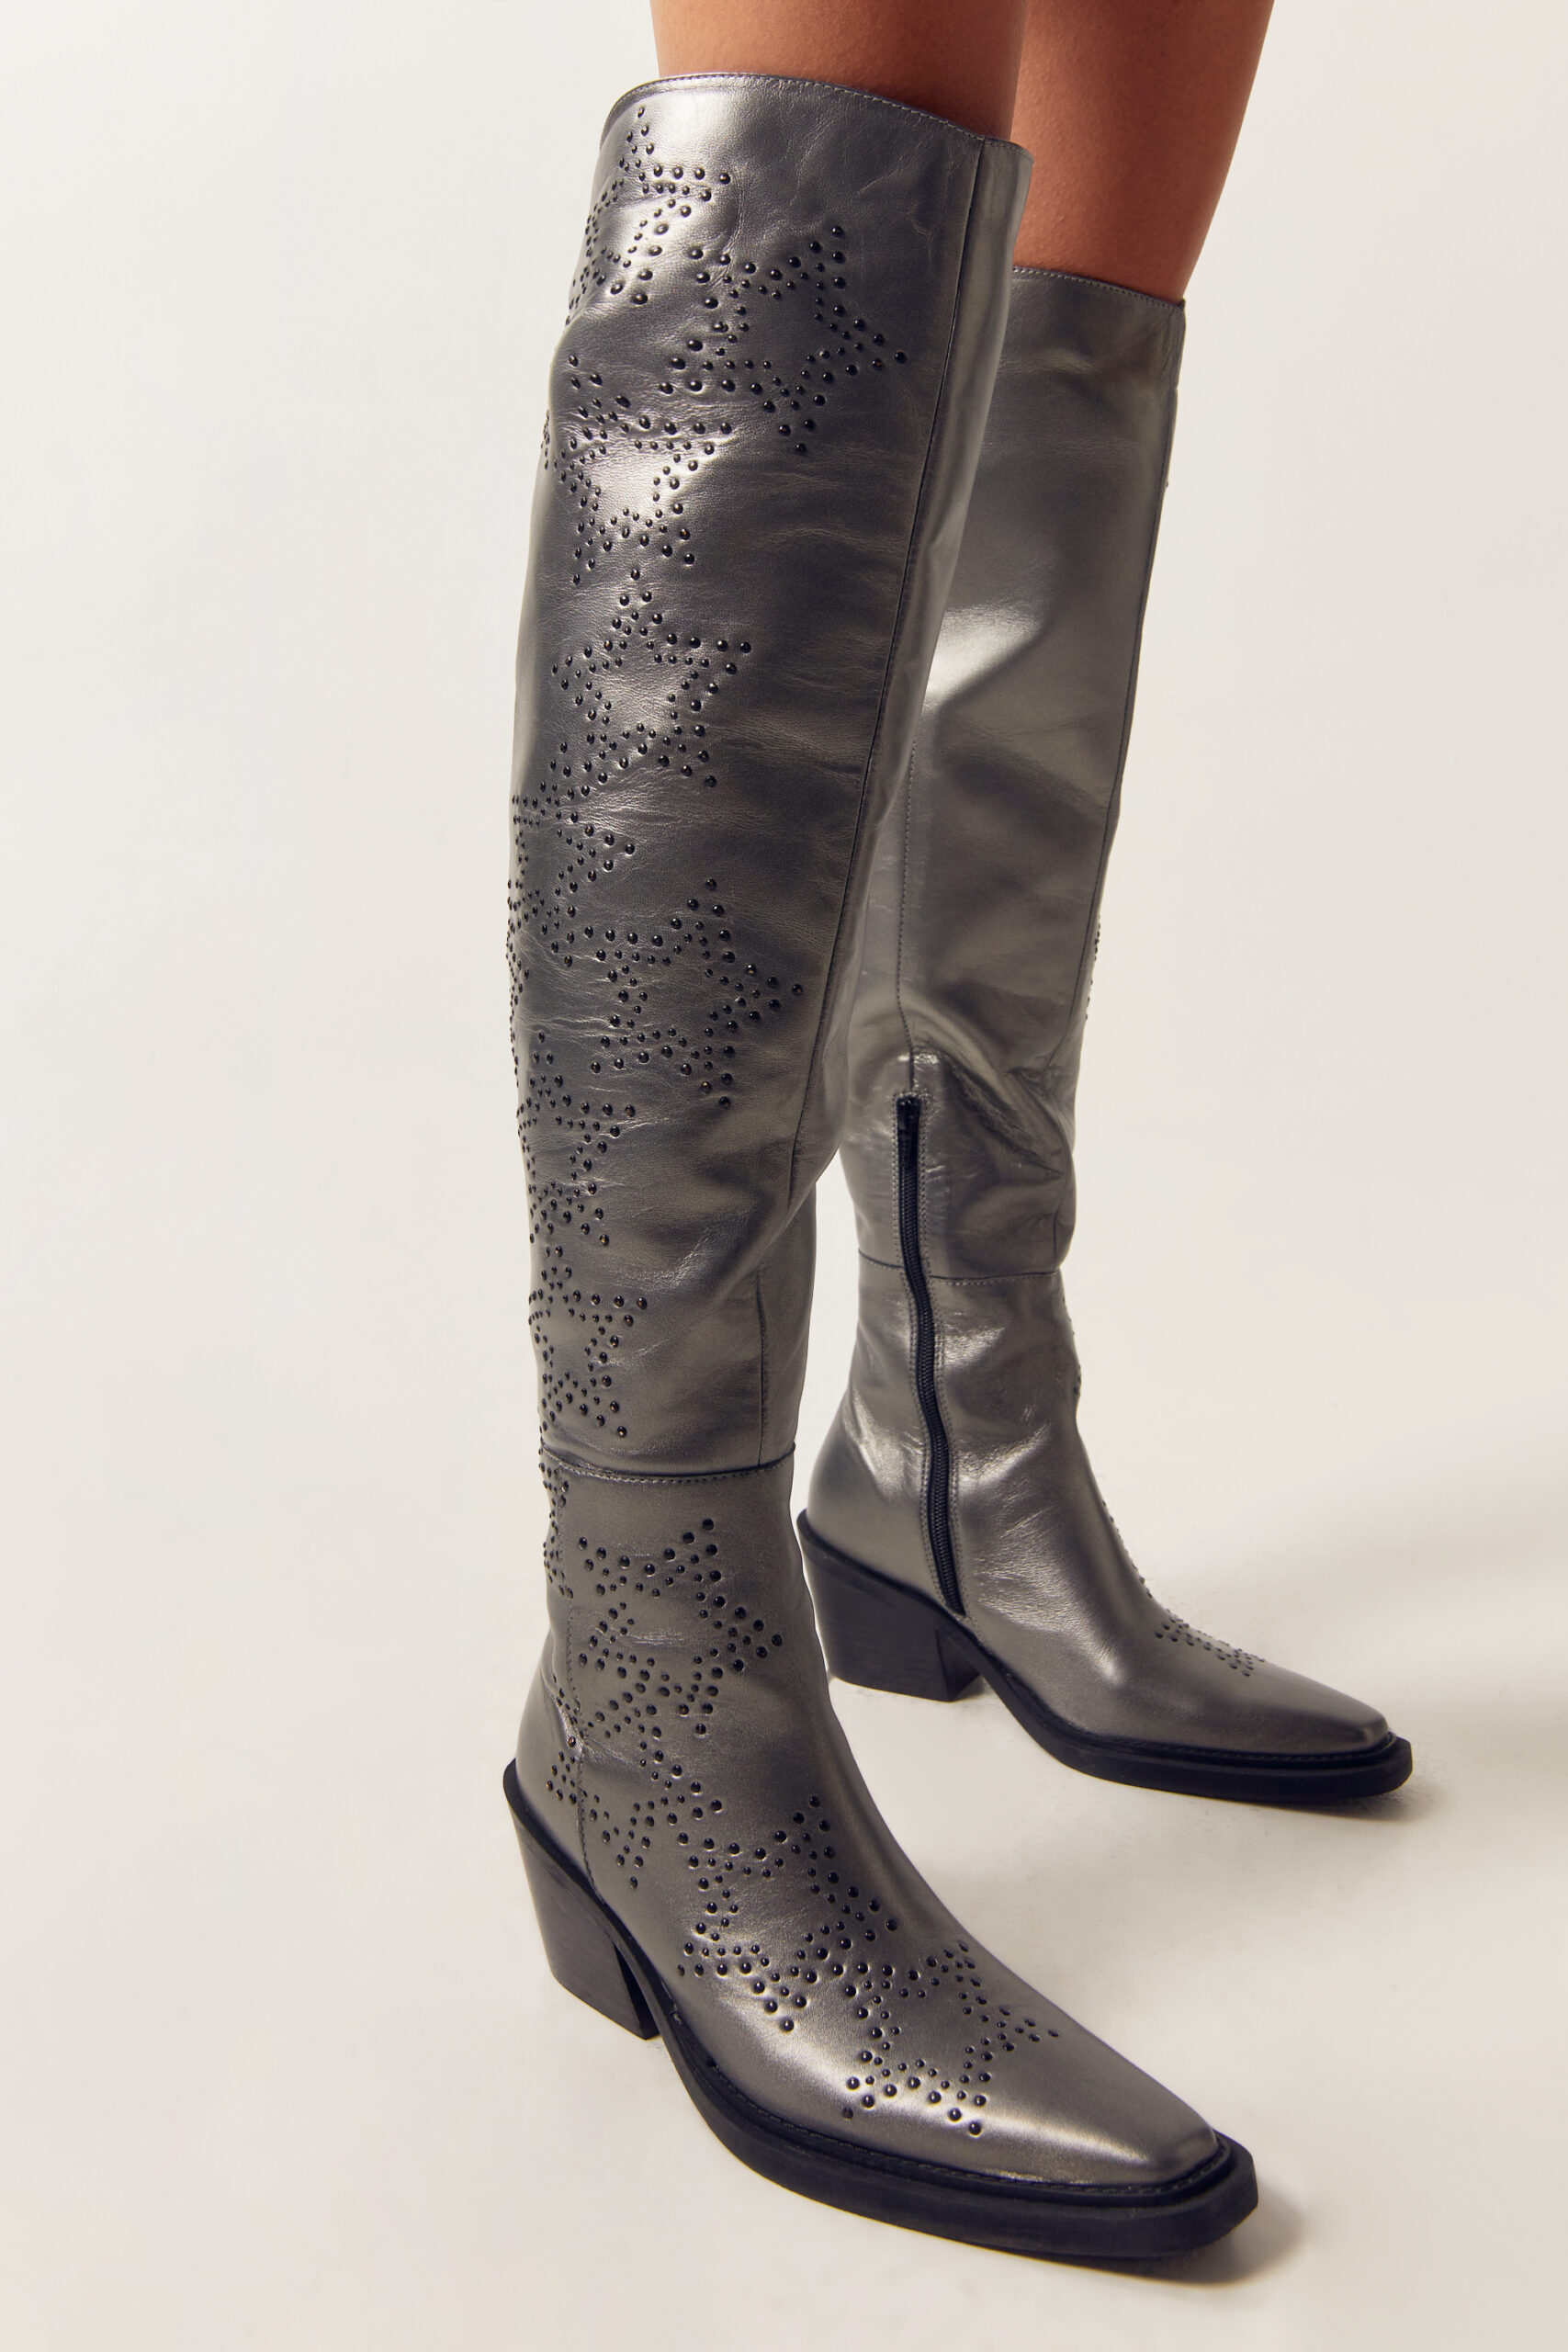 Real Leather Metallic Star Studded Over The Knee Cowboy Boots